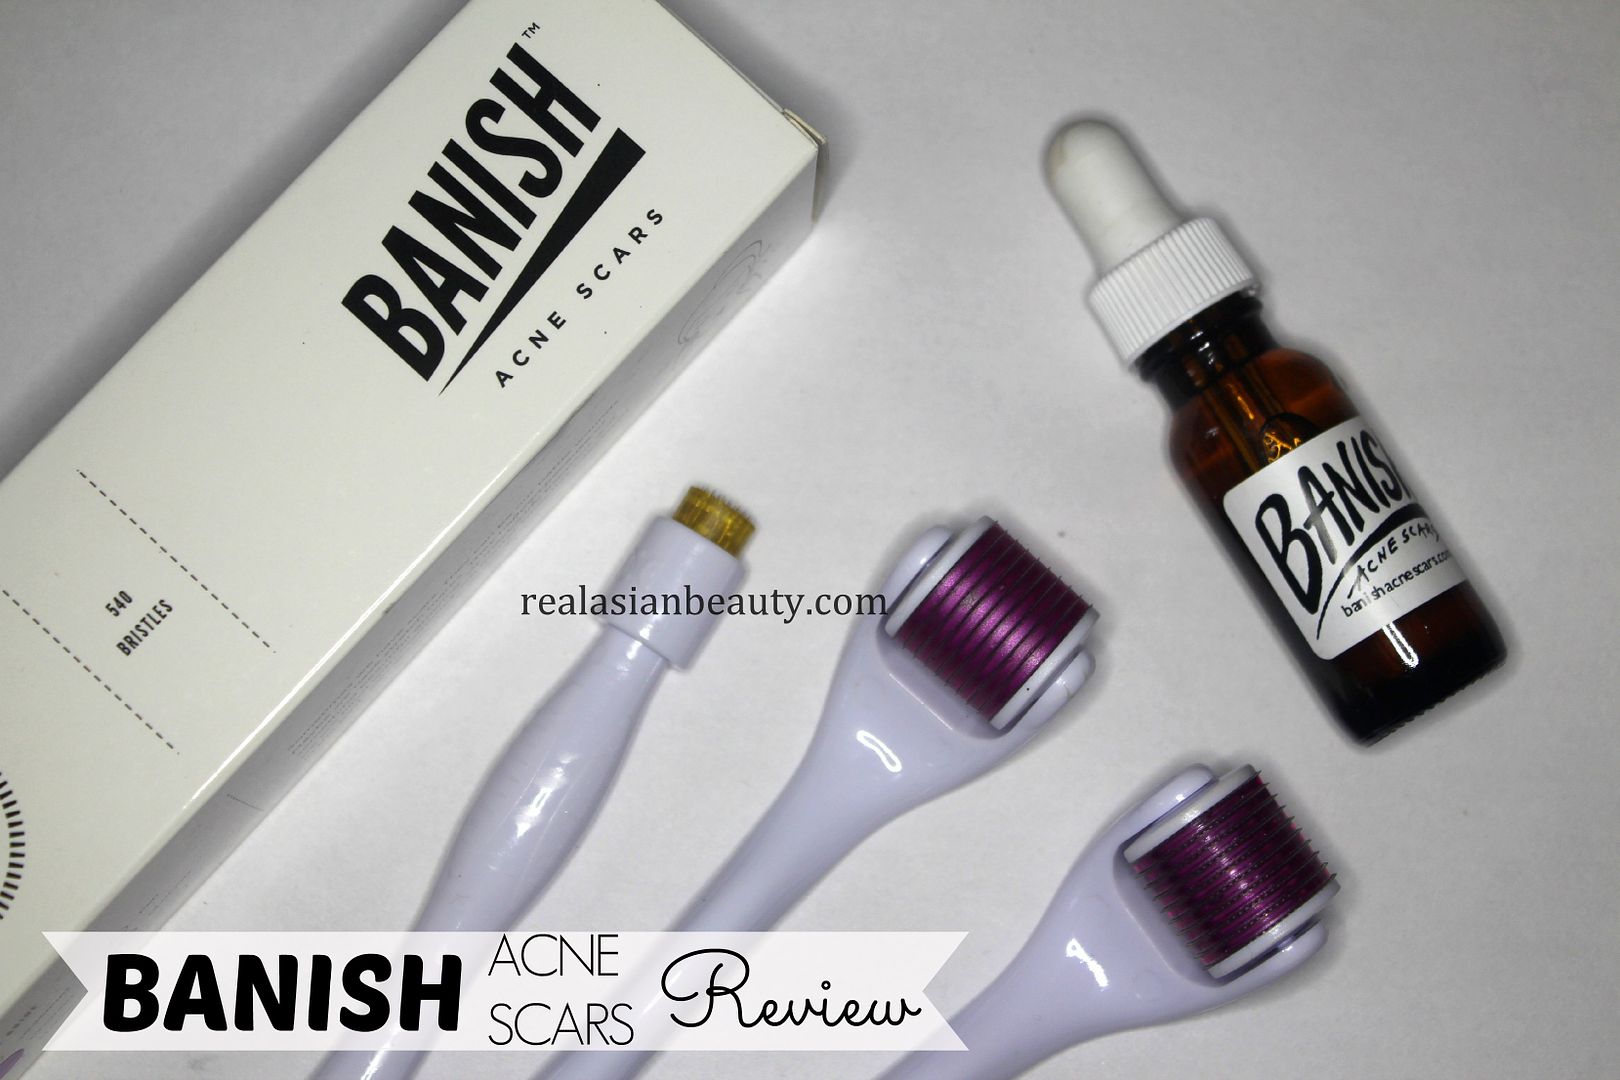 Real Asian Beauty: Banish Acne Scars Derma Roller Demo, Review and 